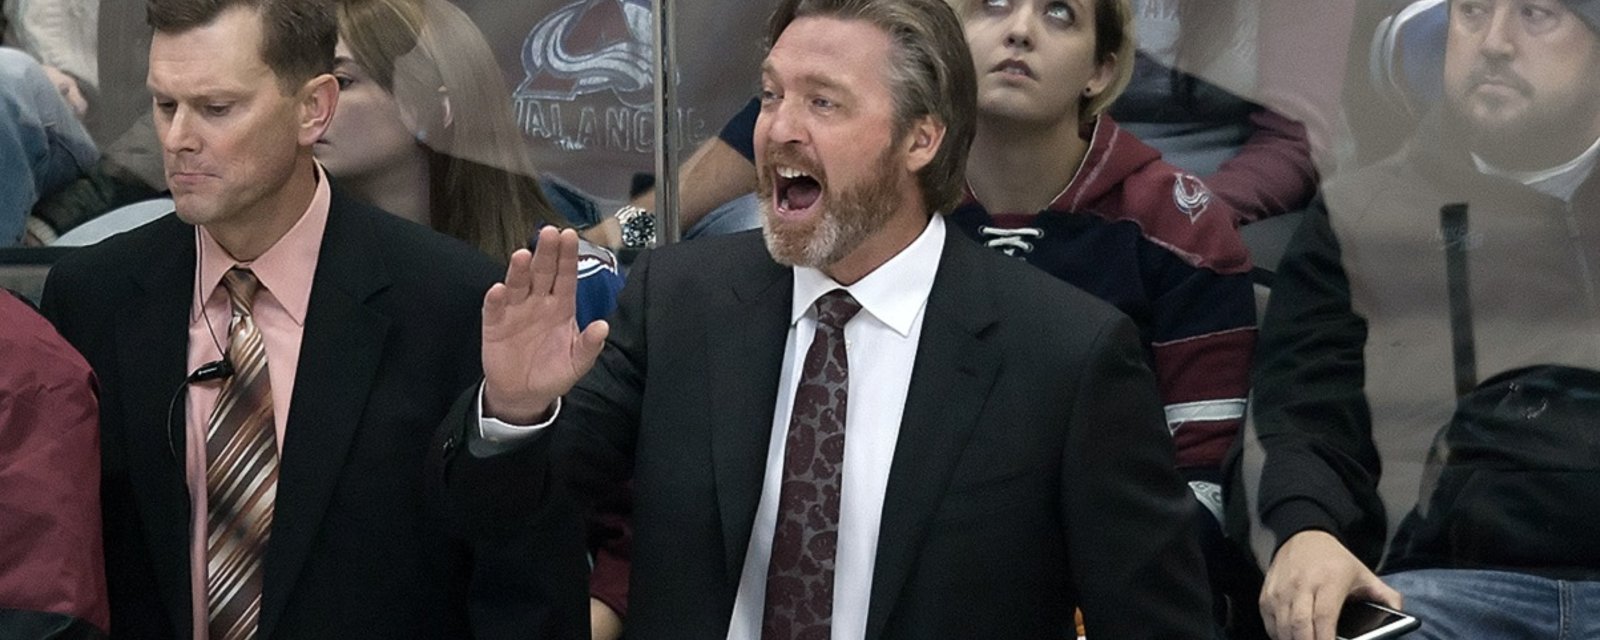 Patrick Roy is officially back in the NHL!